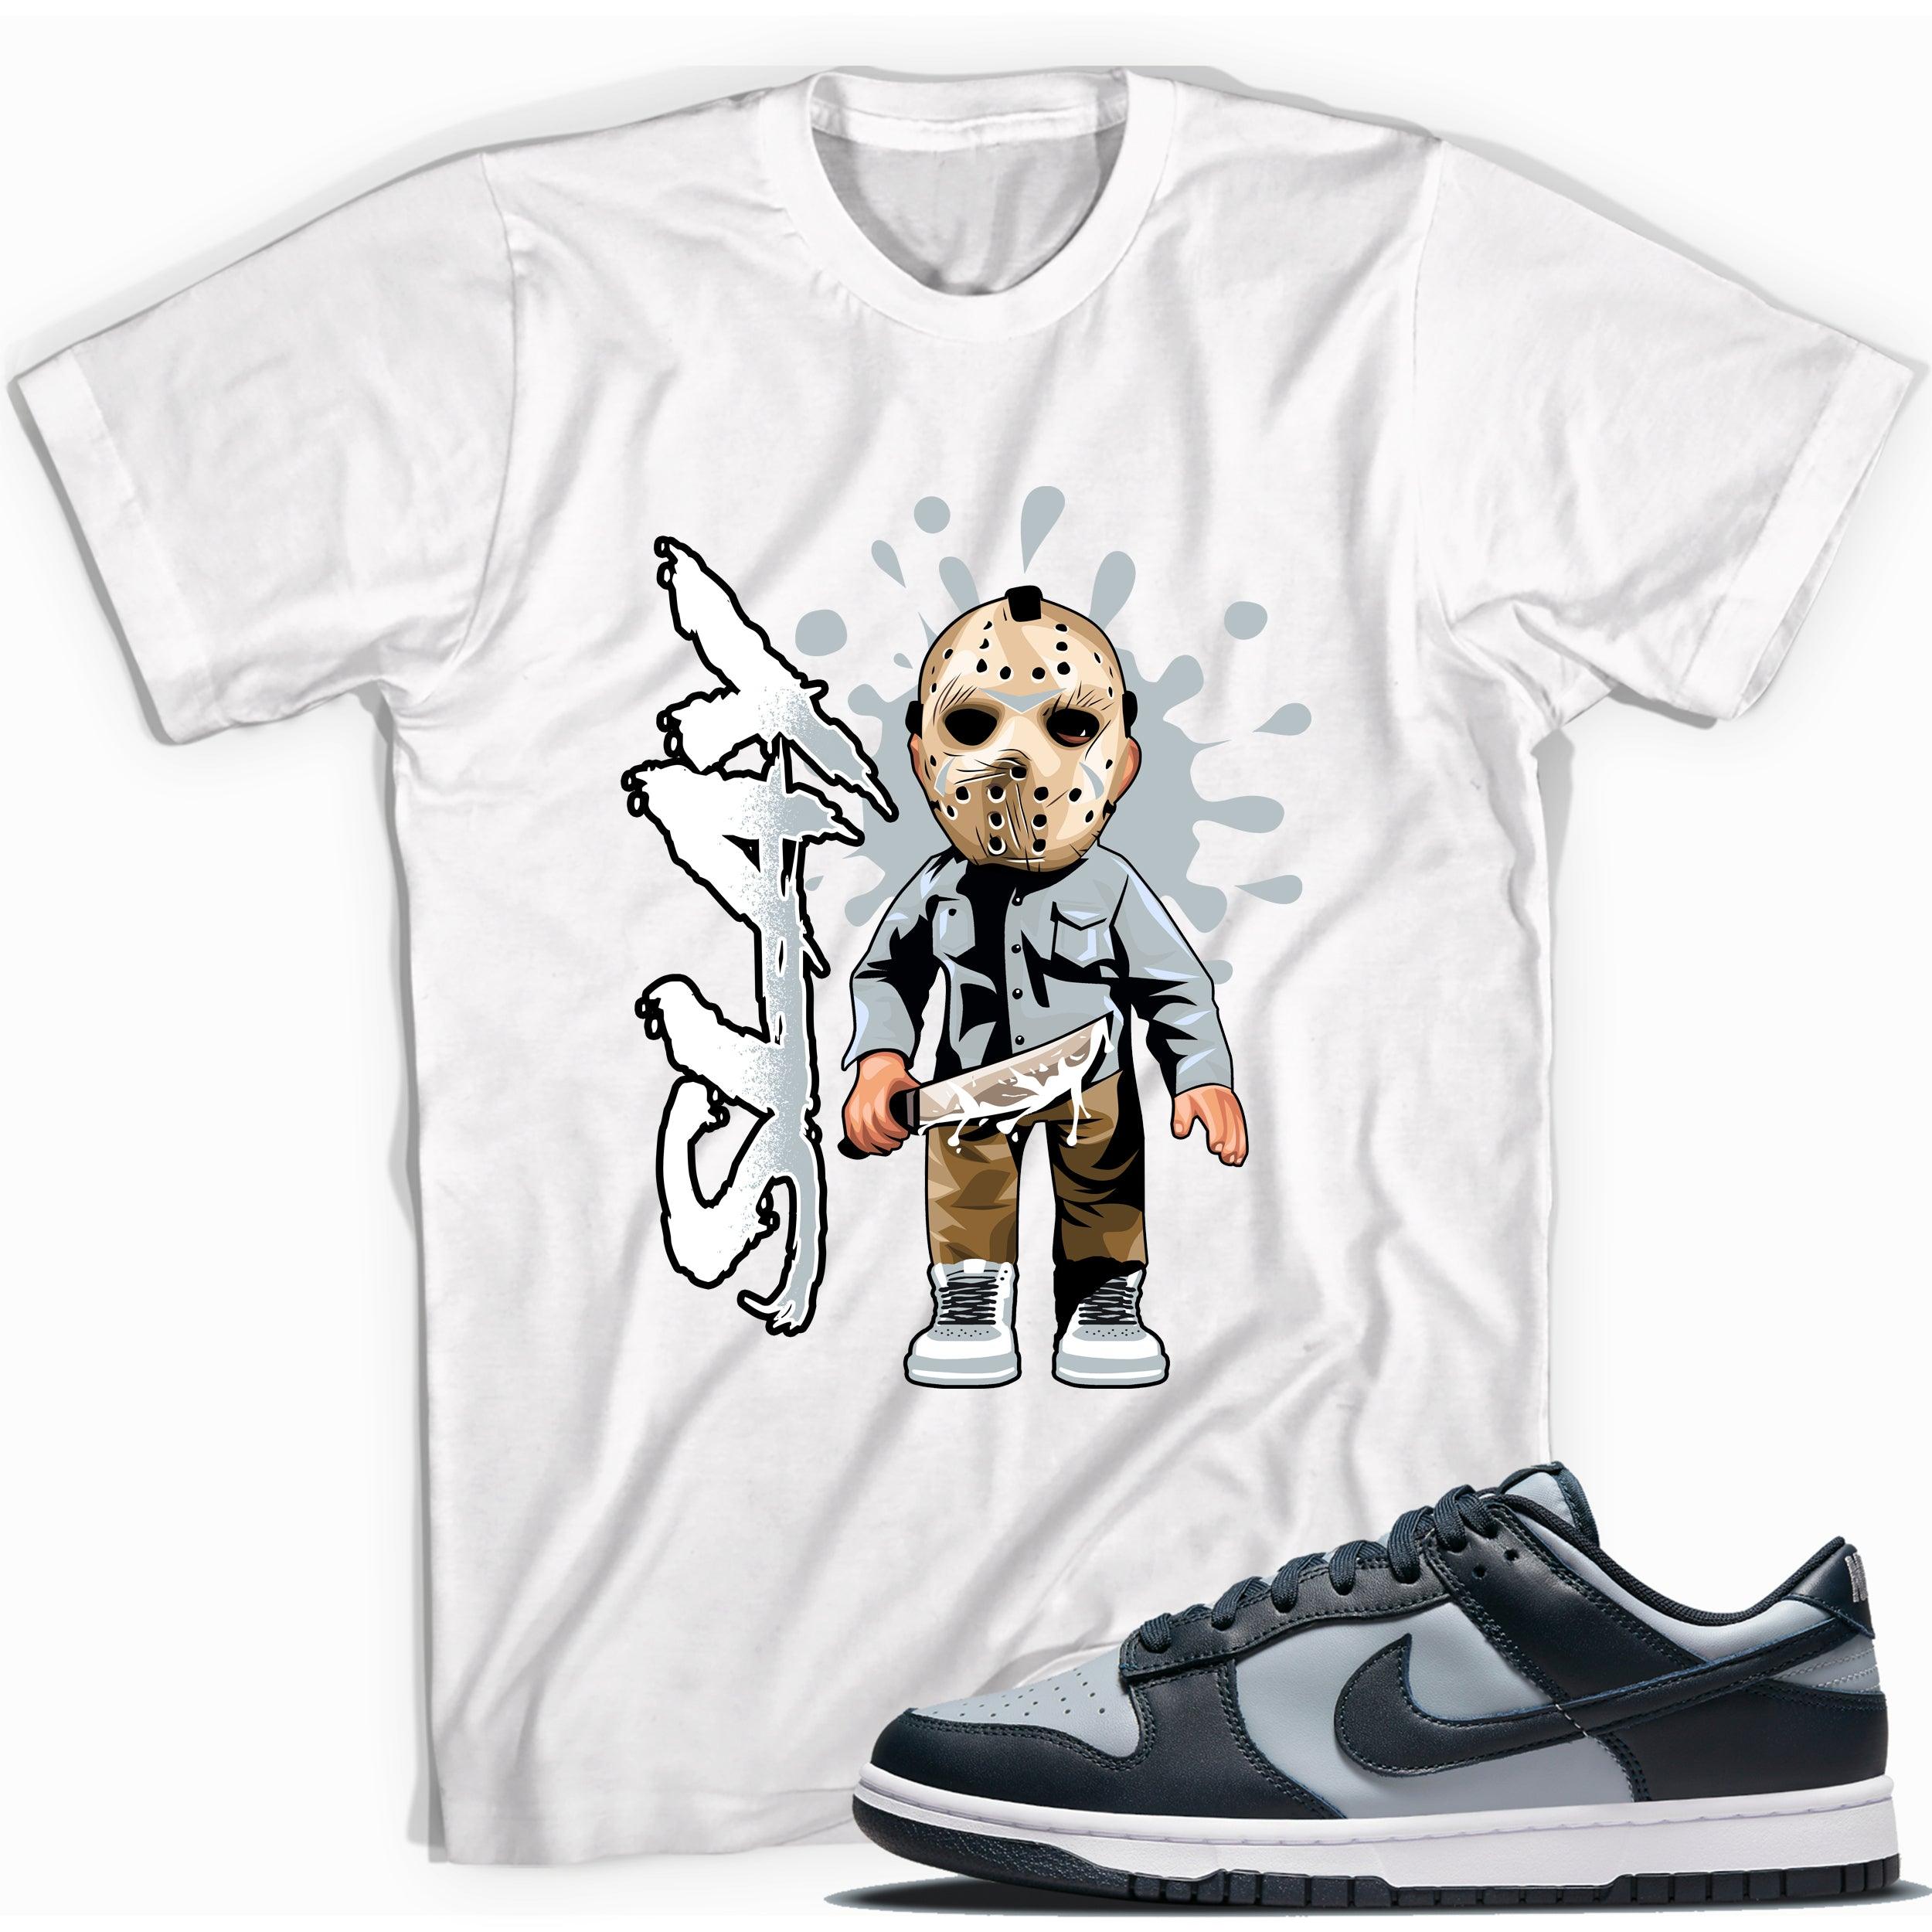 White Slay Sneaker Shirt for Nike Dunk Low Georgetown photo